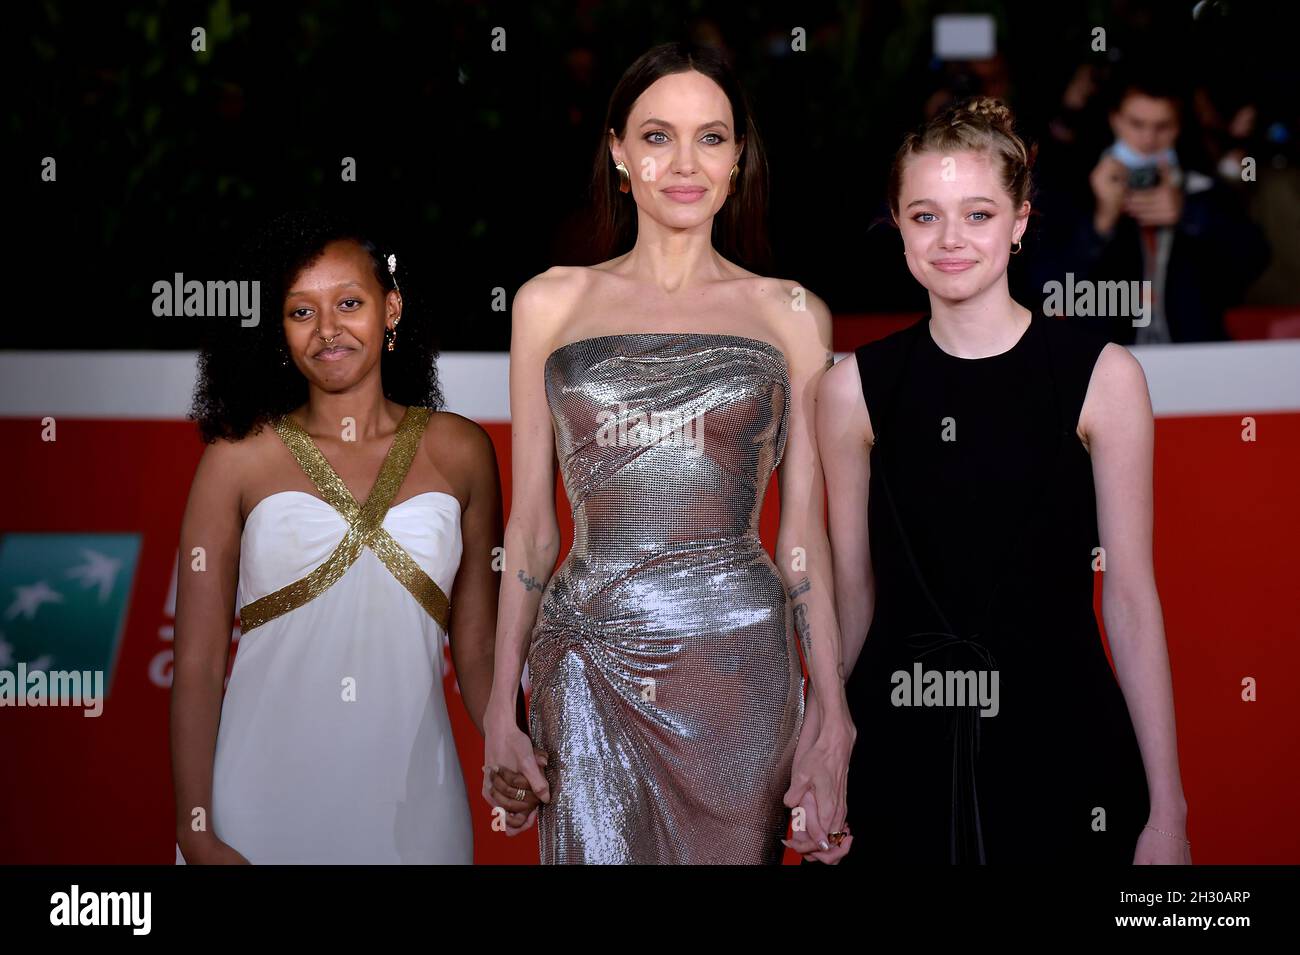 ROME, ITALY - OCTOBER 24 Zahara Marley Jolie-Pitt, Angelina Jolie ,Shiloh Jolie-Pitt,attends the red carpet of the movie 'Eternals' during the 16th Rome Film Fest 2021 on October 24, 2021 in Rome, Italy. Stock Photo